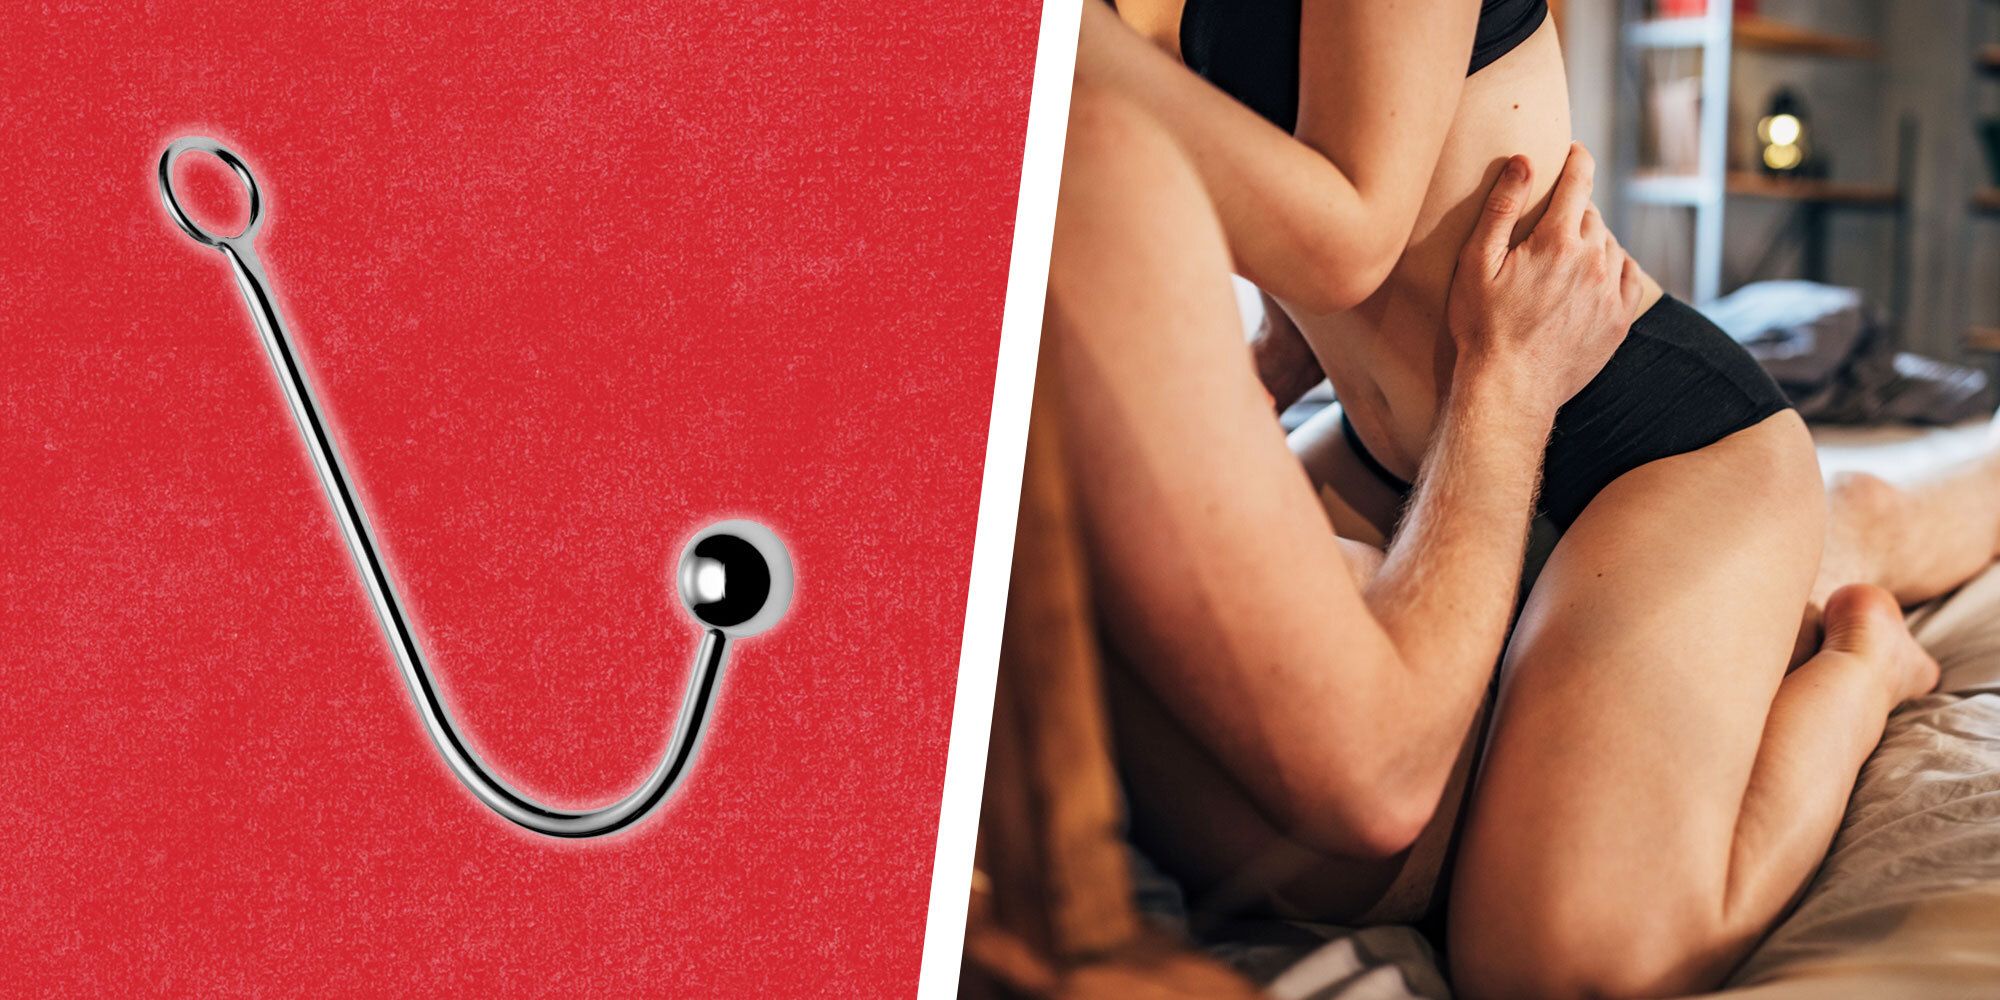 Anal Hooks What They Are and How to Use Them, According to Experts pic pic